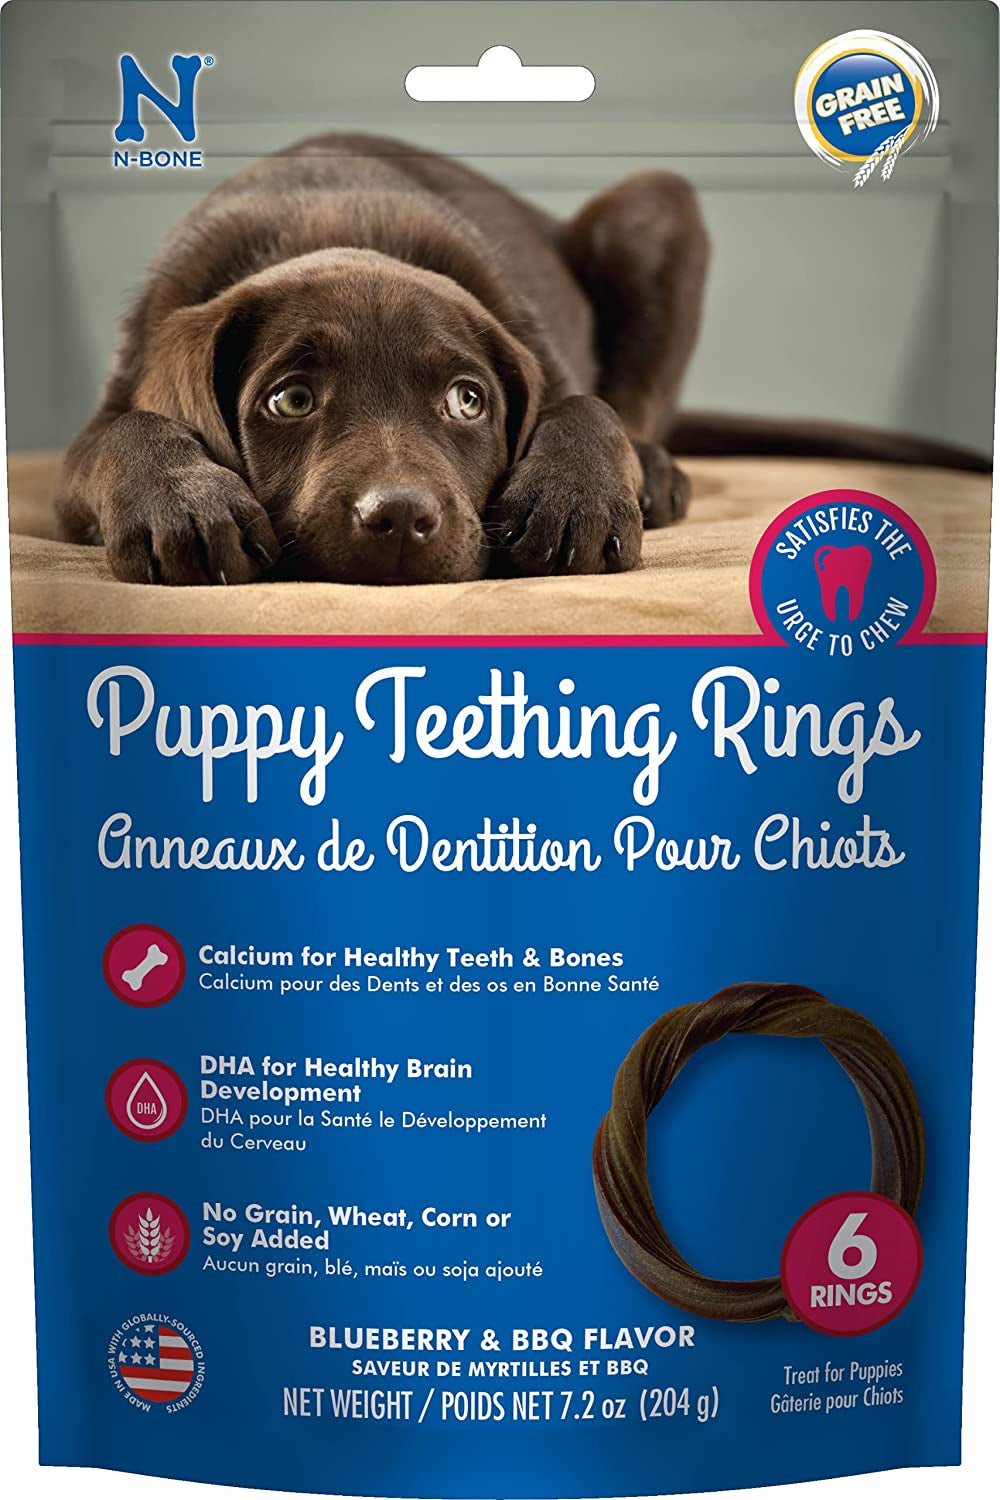 N-Bone Puppy Teething Ring Blueberry and BBQ Flavor